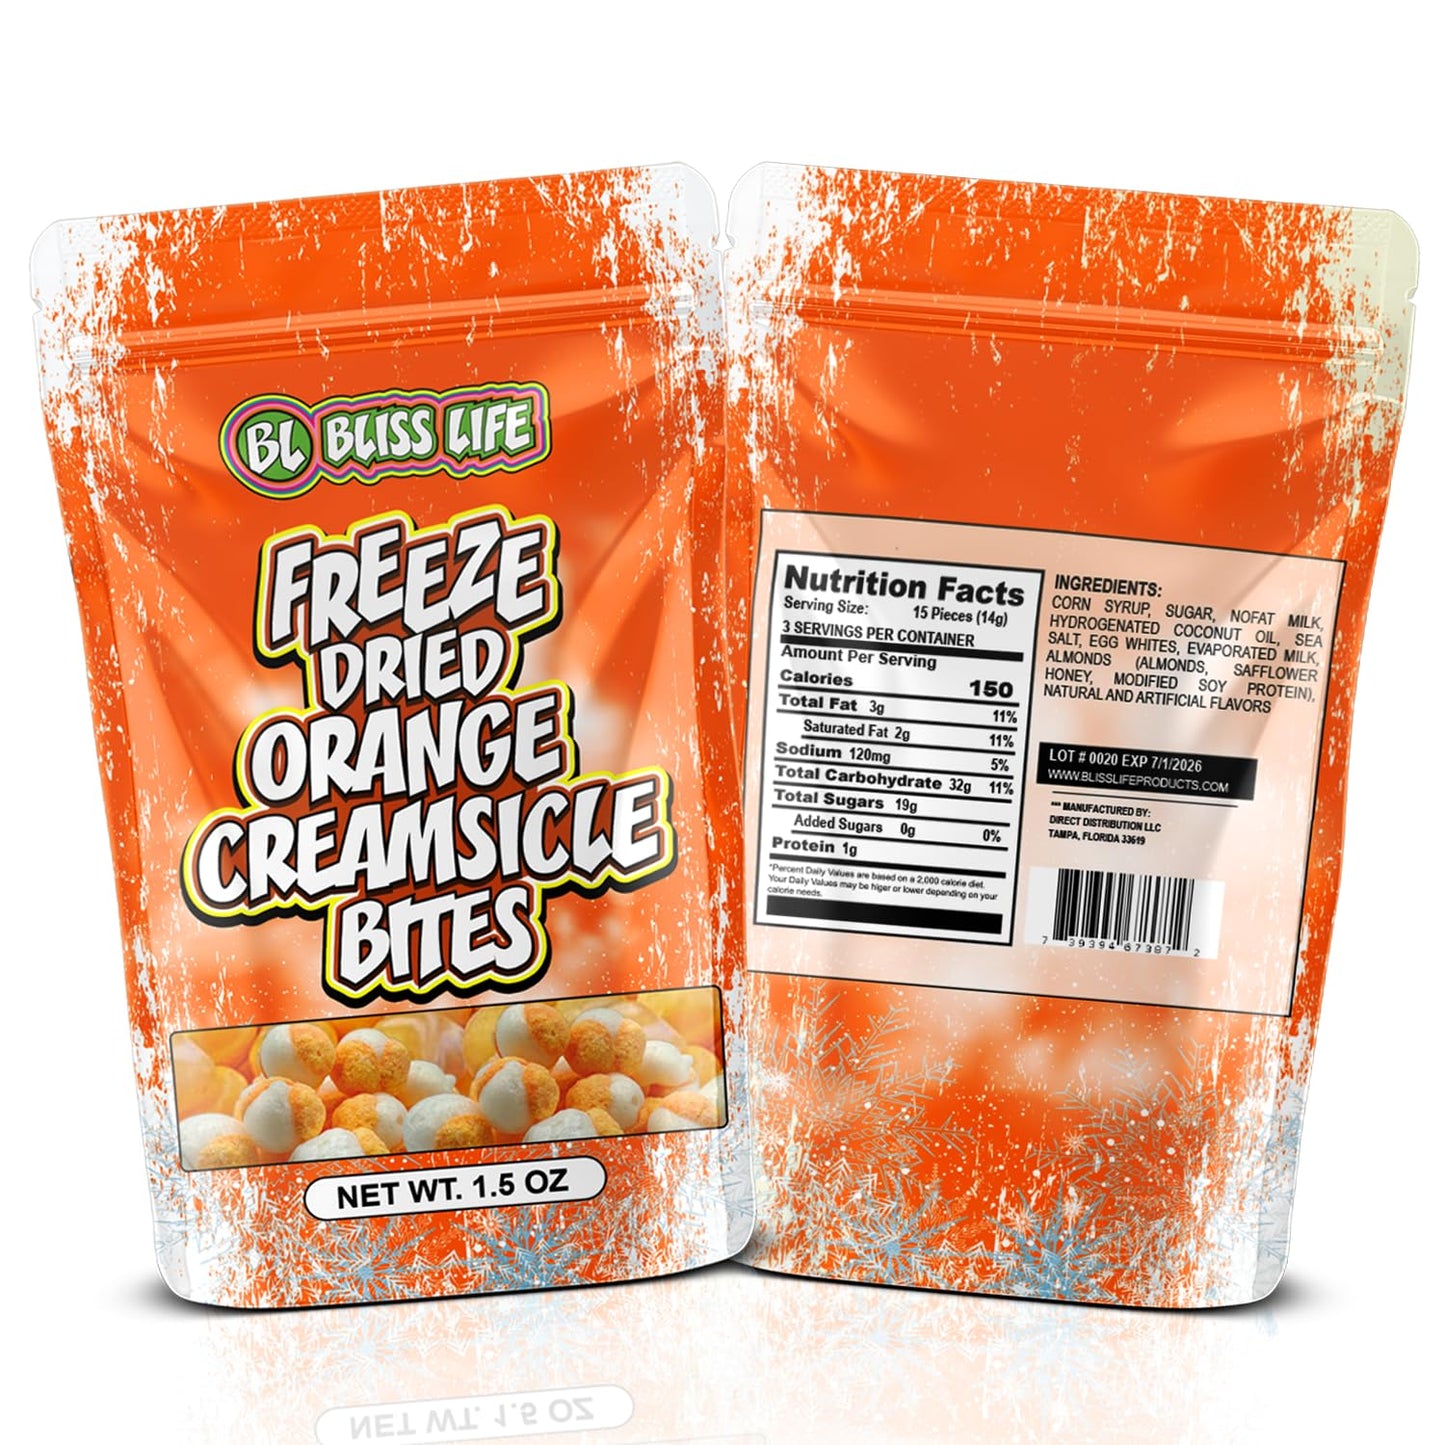 Bliss Life Freeze Dried Candy Bites Variety Pack Strawberries and Cream S'mores Caramel Apple Orange Creamsicle (Orange Creamsicle, 1 Count)